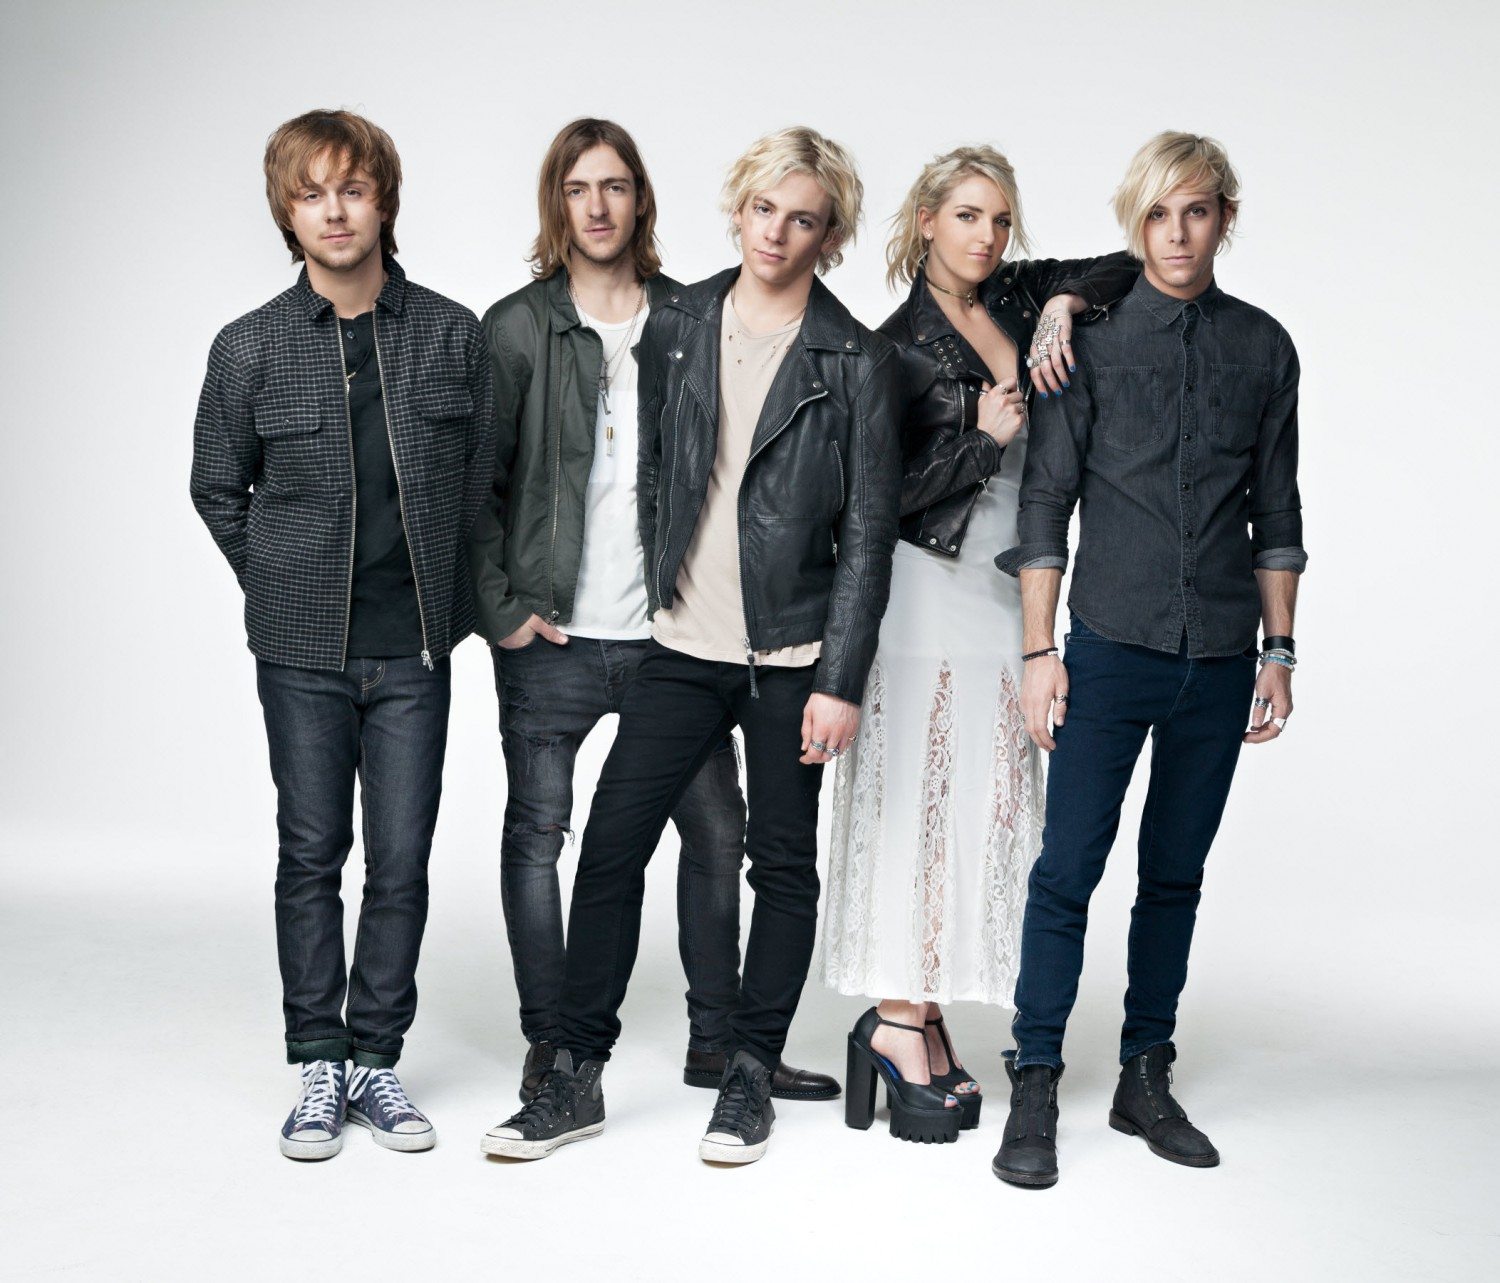 R5’s Ross Lynch Talks Feb. 27 Show at the Beacon Theatre, the Future of R5 and More